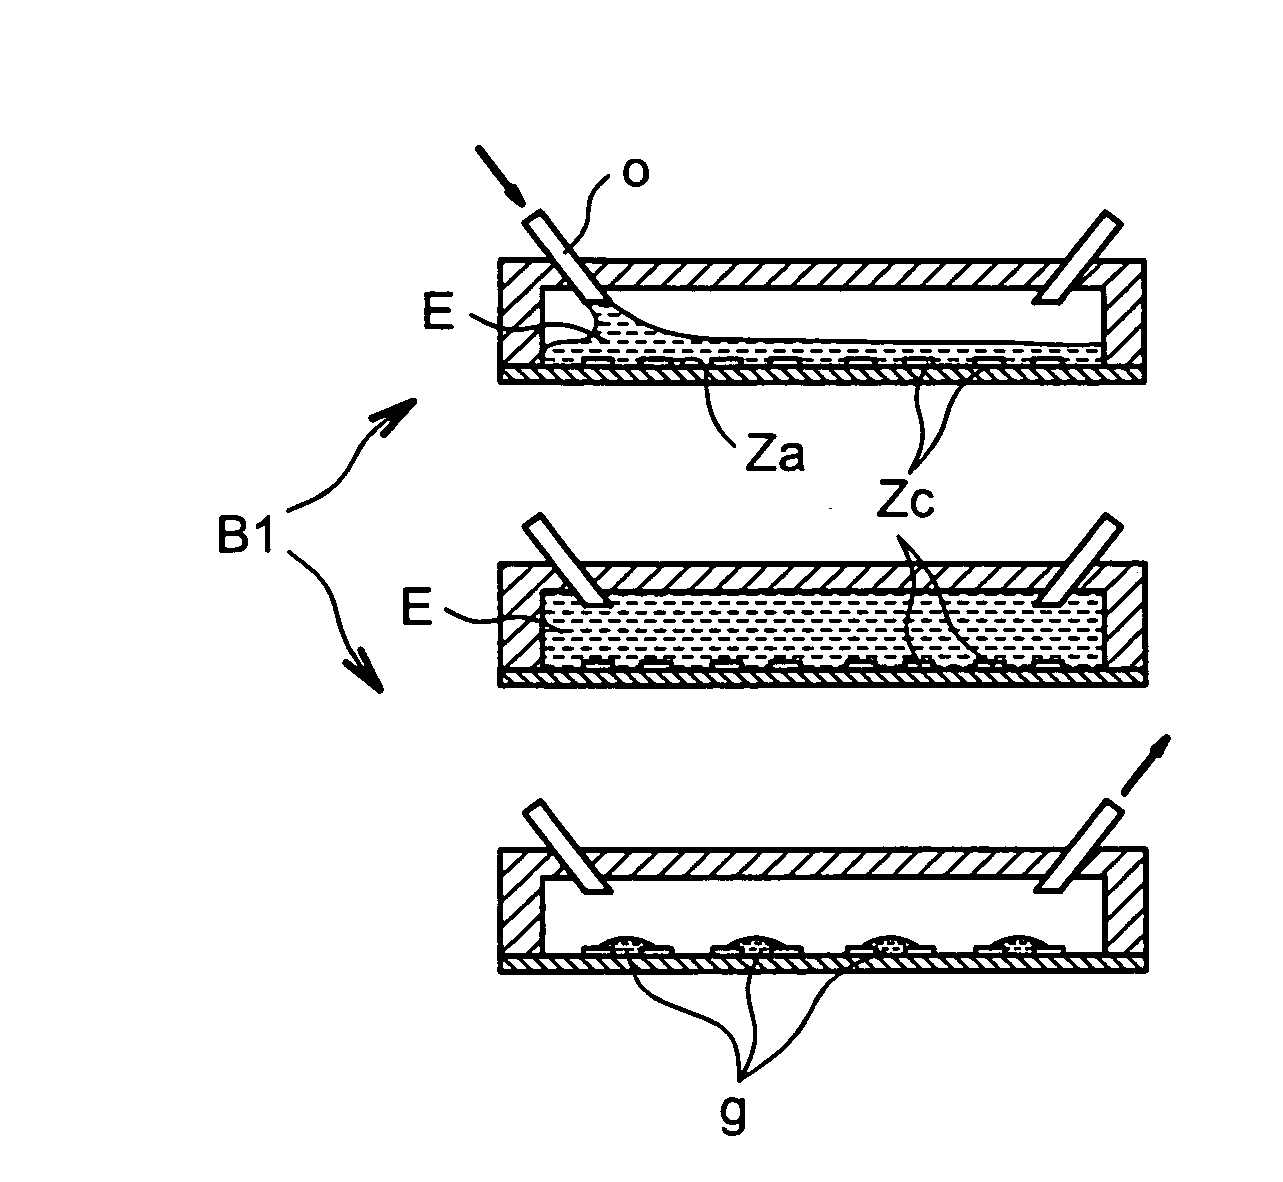 Process For Distributing Drops Of A Liquid Of Interest Onto A Surface